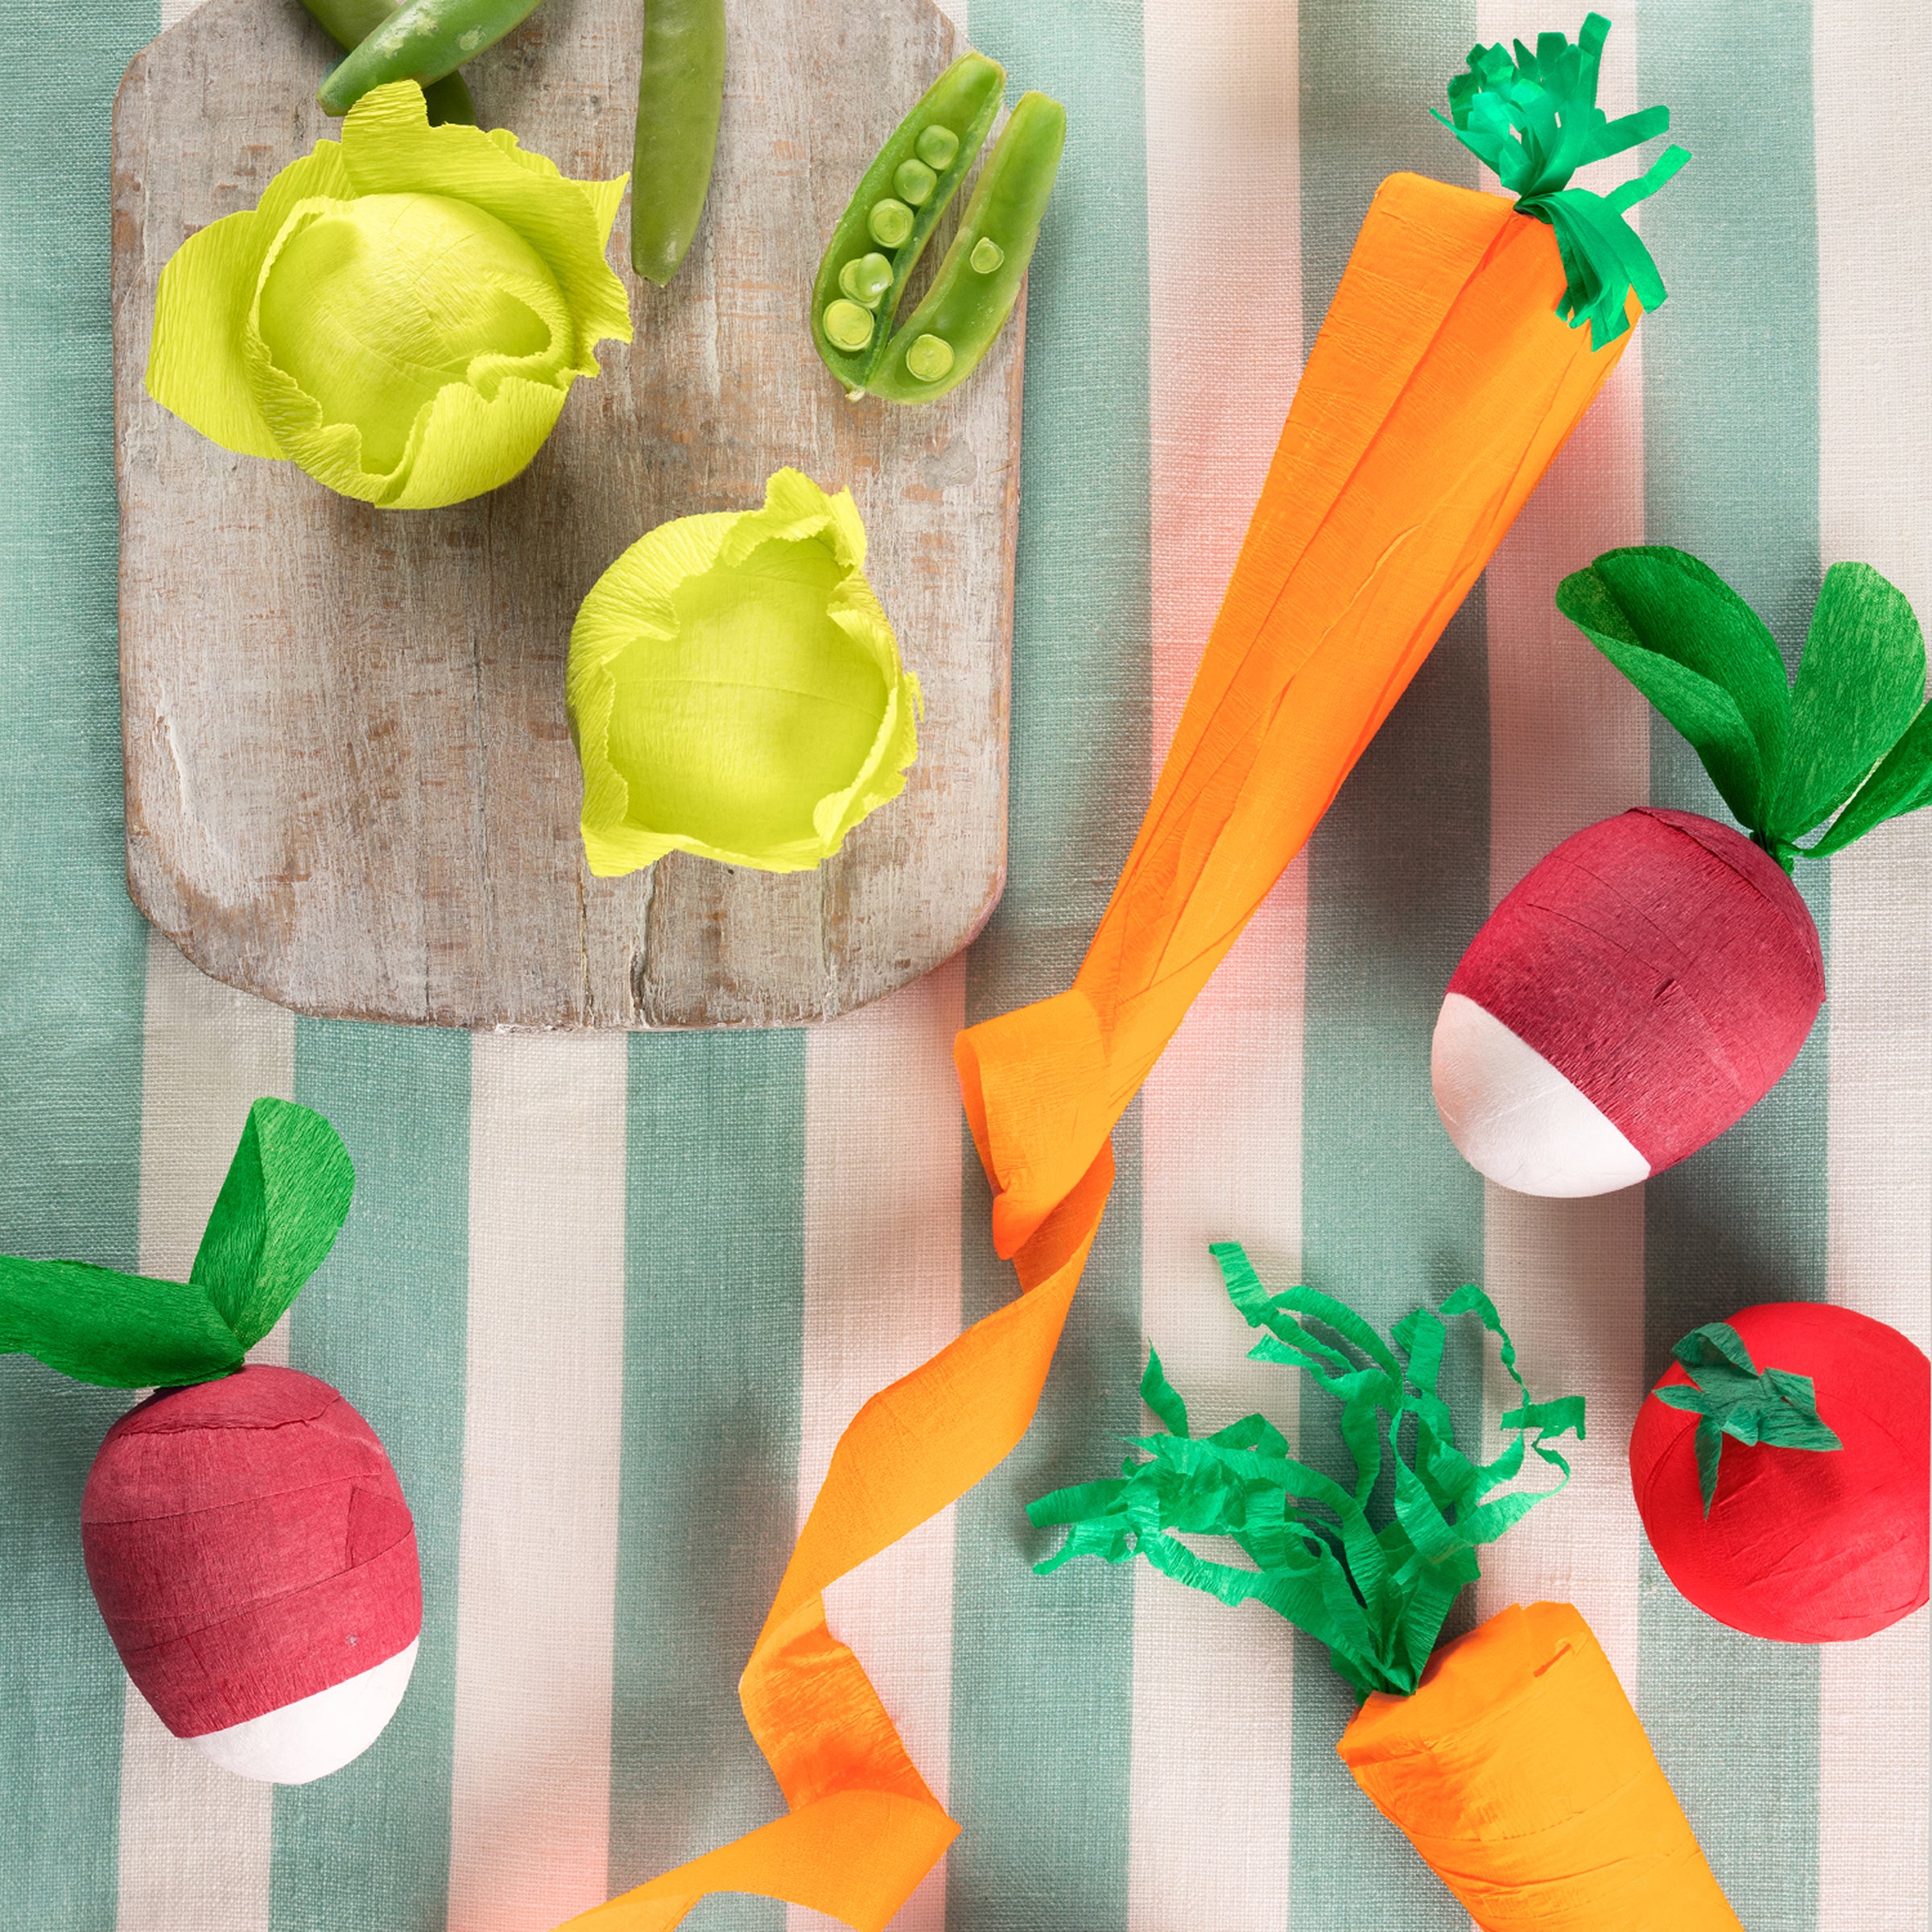 Give your party guests a surprise with our vegetable party favors filled with friendship bracelets, stickers, jokes and a party hat.